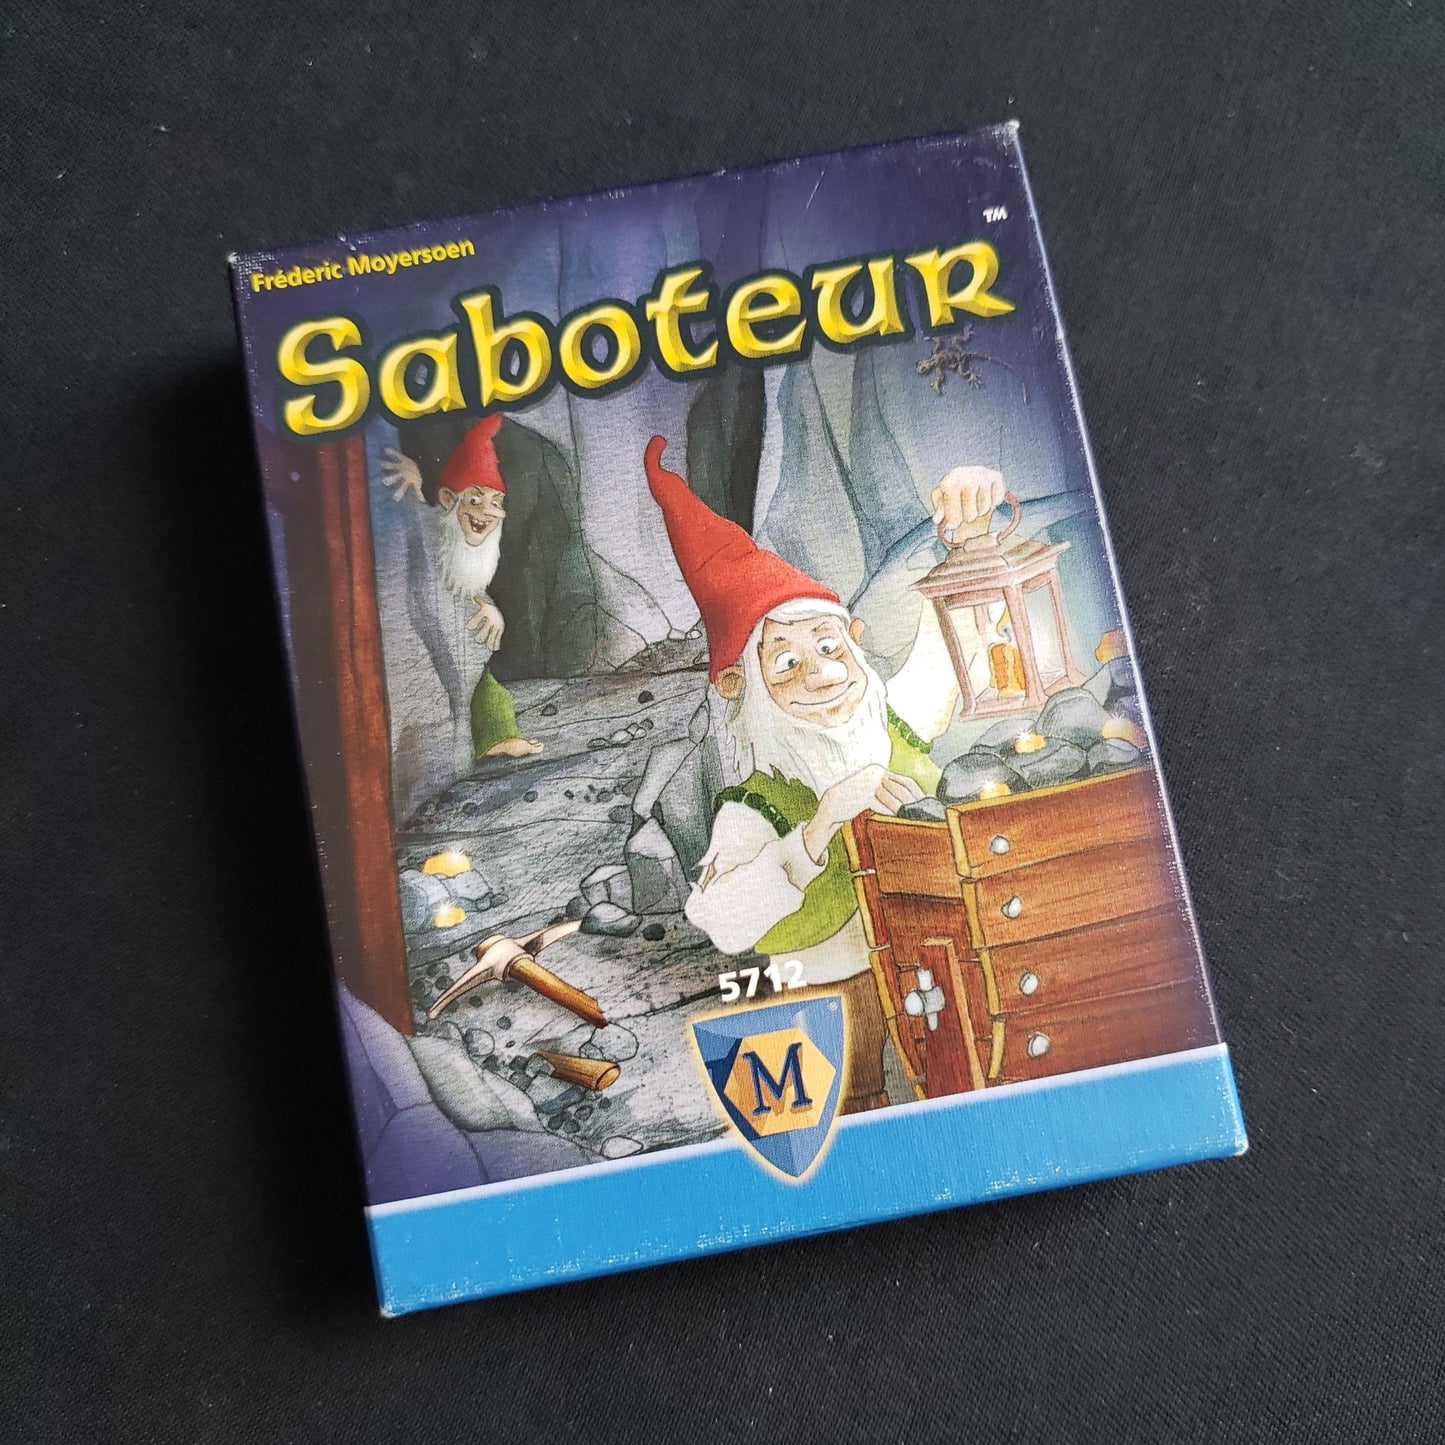 Image shows the front cover of the box of the Saboteur card game